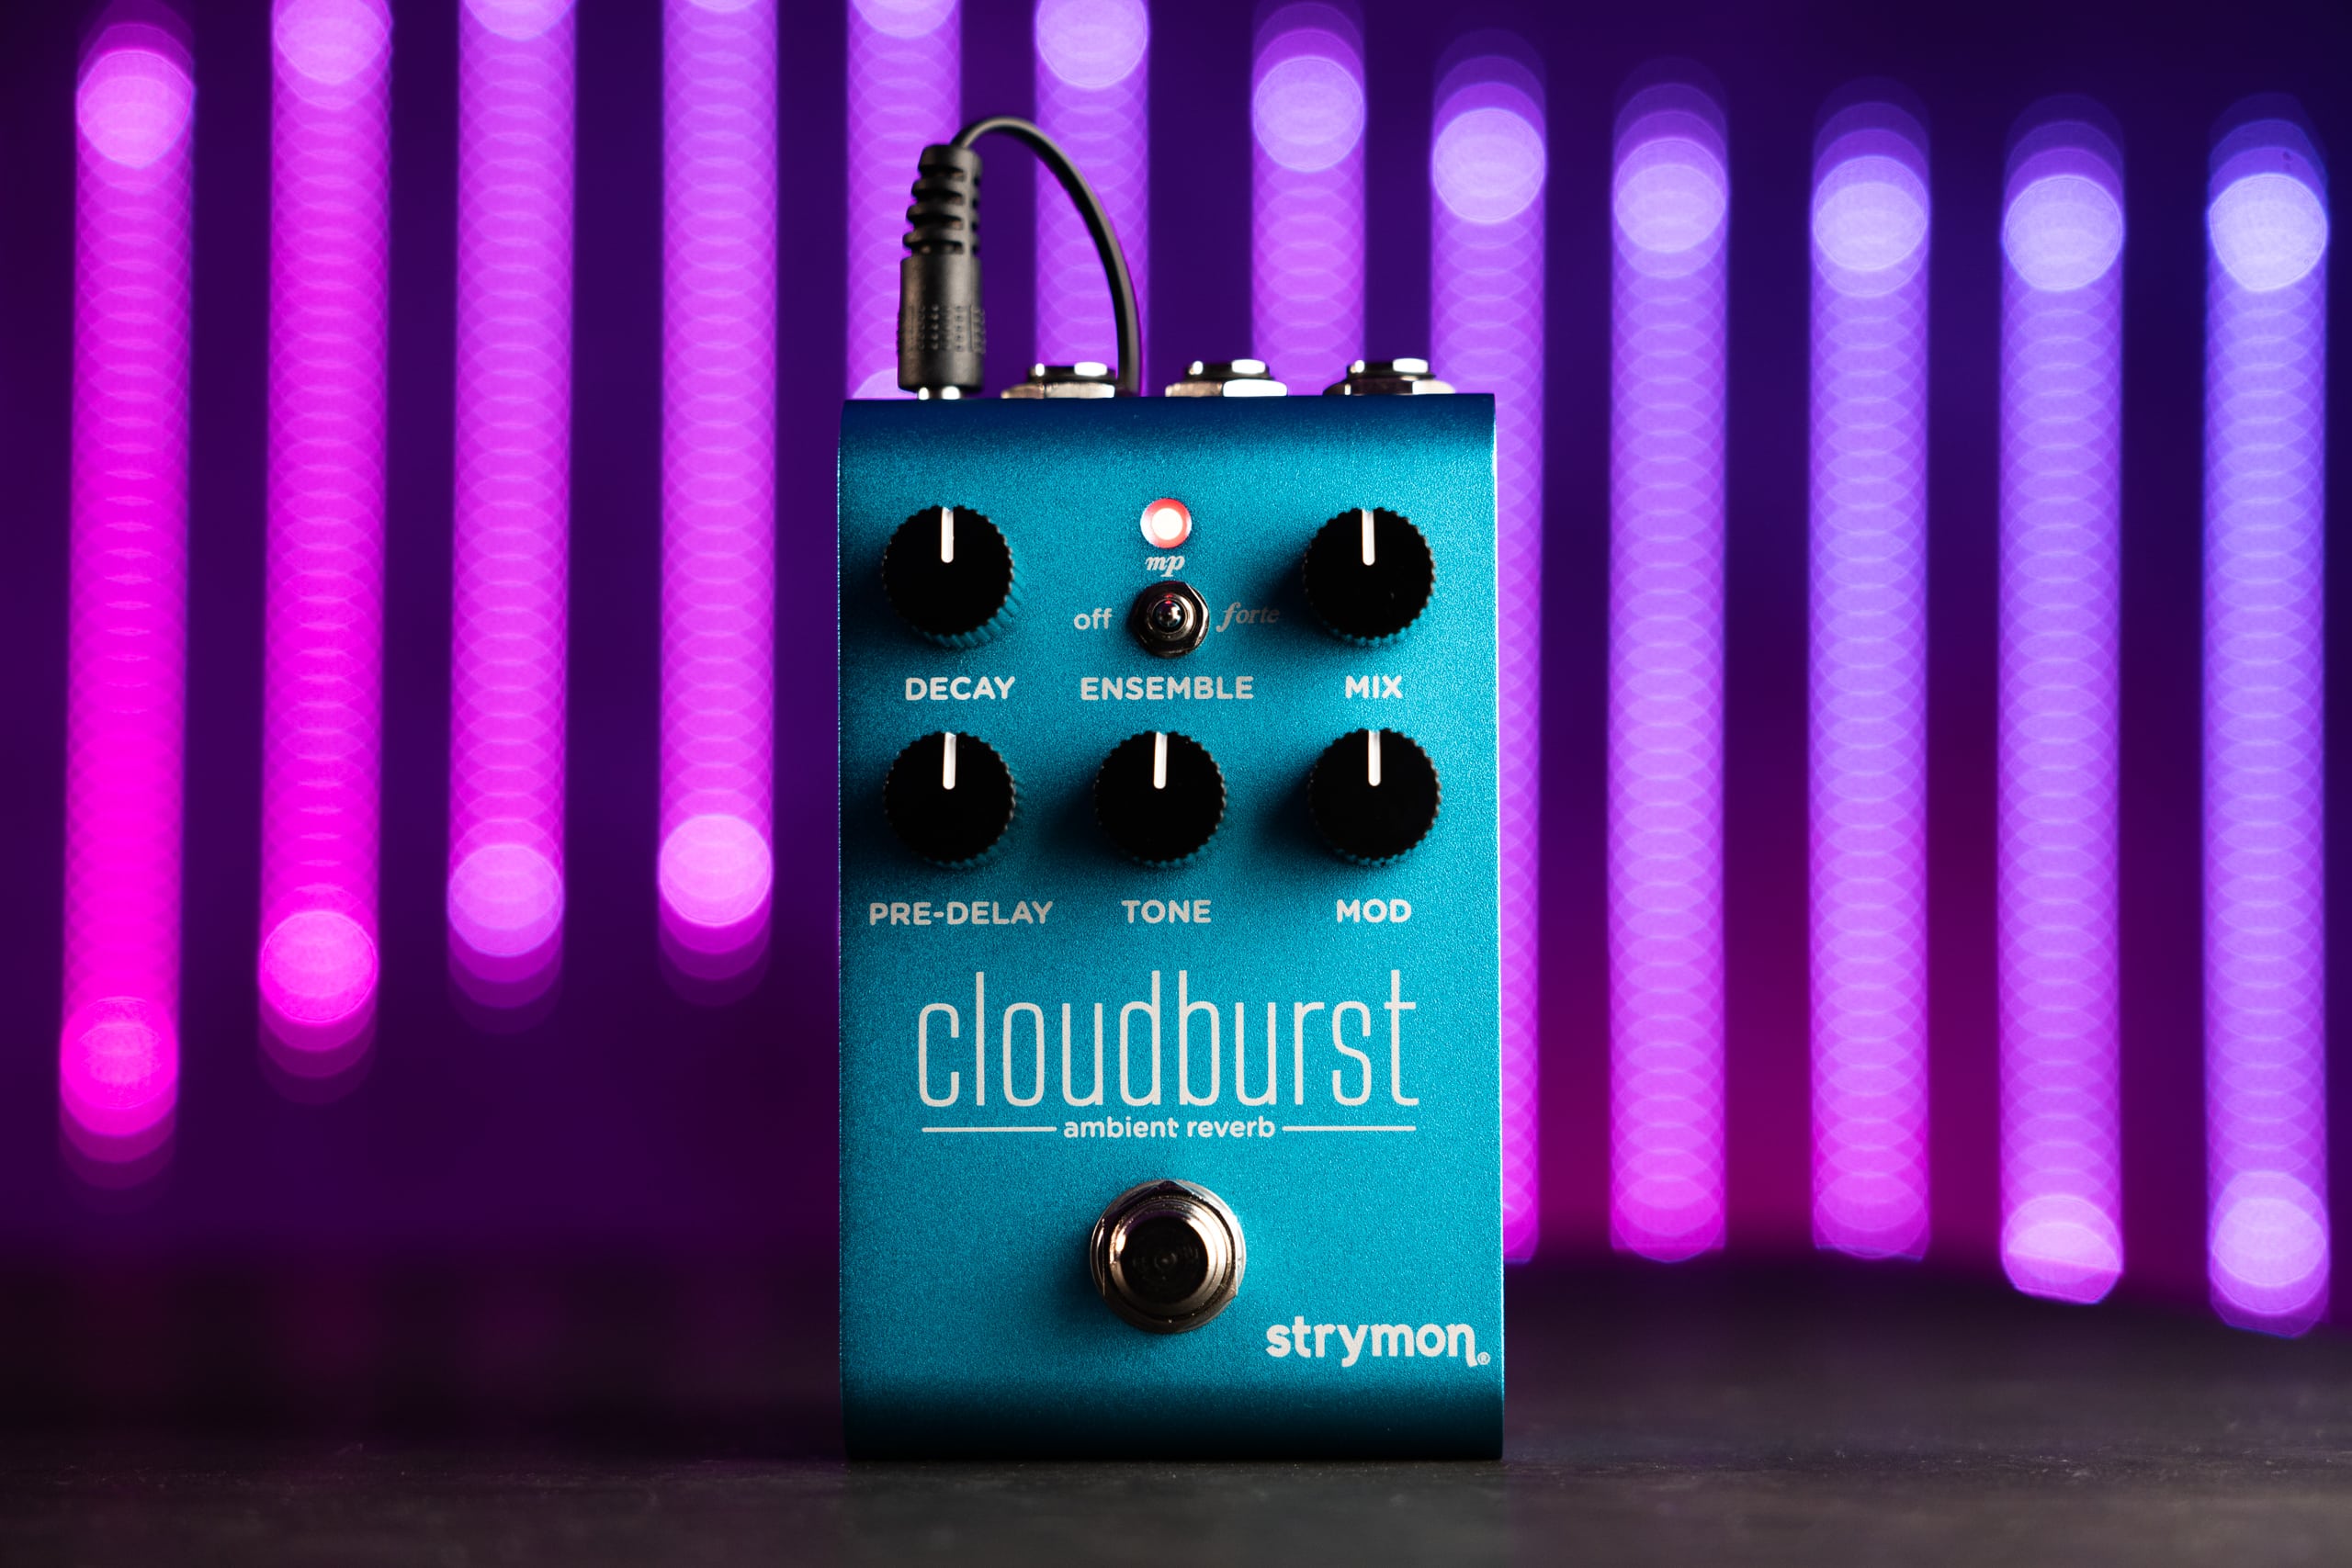 Strymon Cloudburst in front of pink and blue LED light arrays.